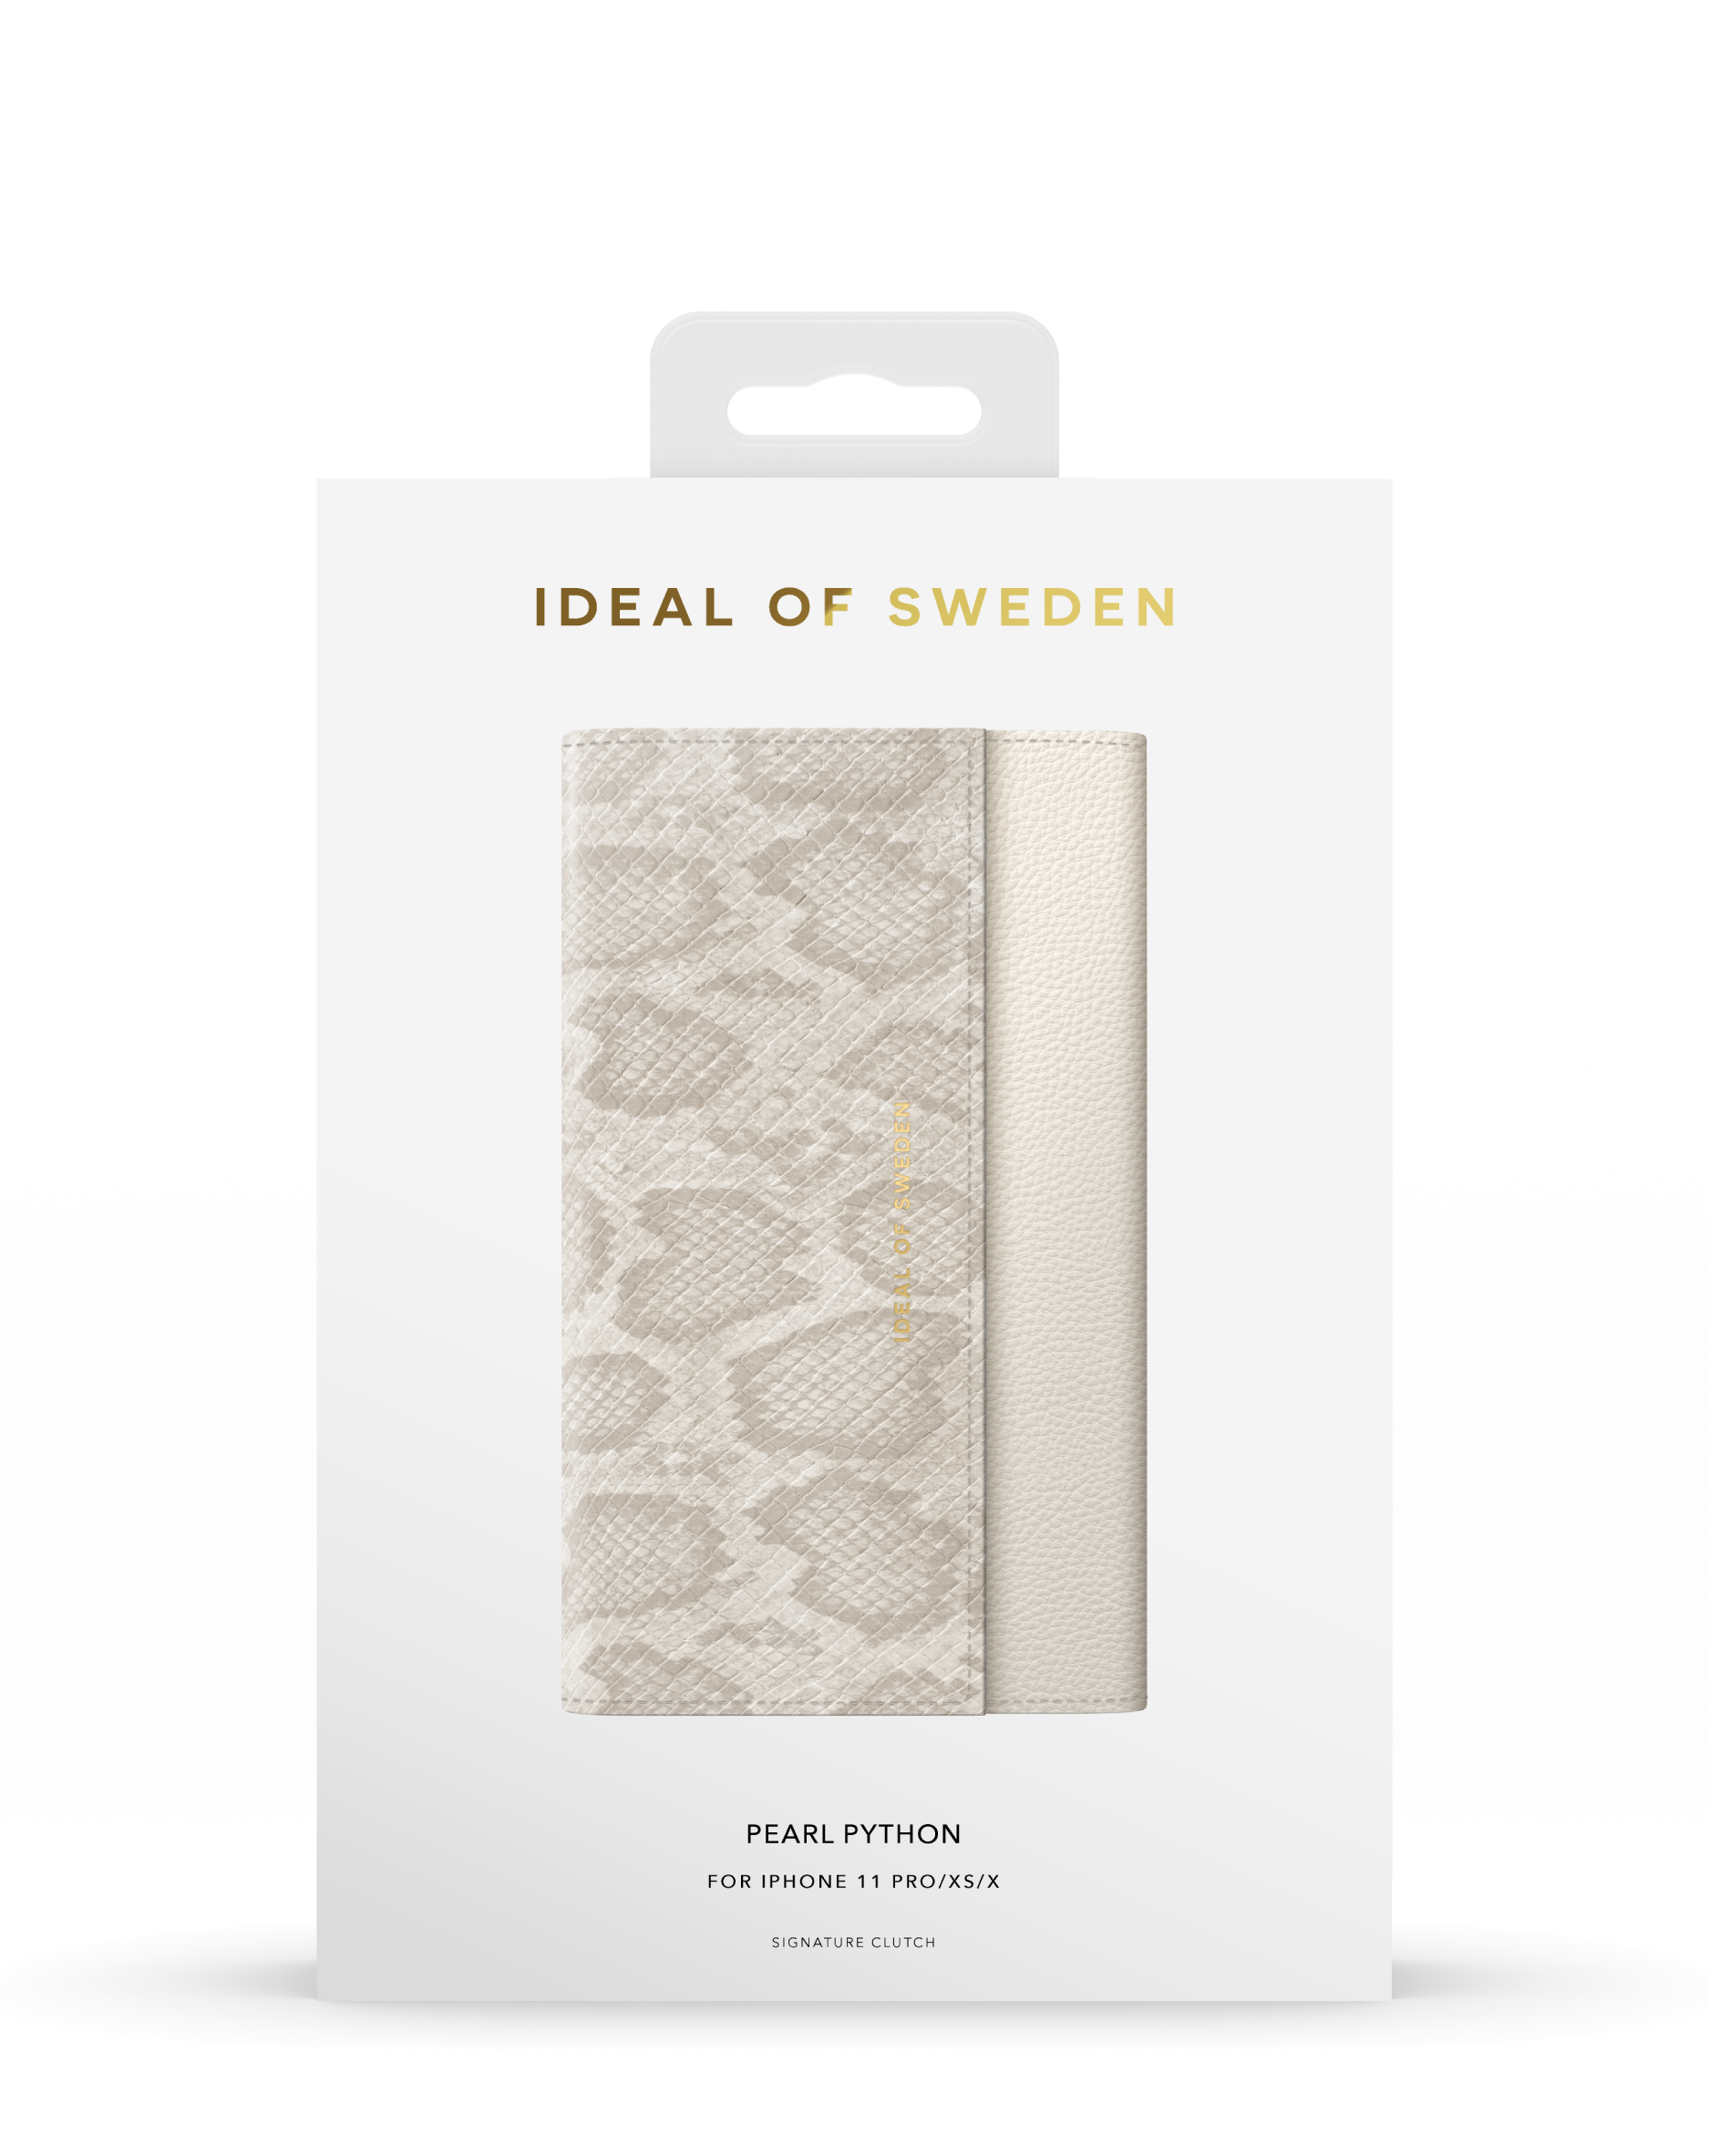 IDEAL OF iPhone Cover, iPhone SWEDEN IDSCSS20-I1958-200, X, Full Pro, Pearl Apple, 11 Python XS, iPhone